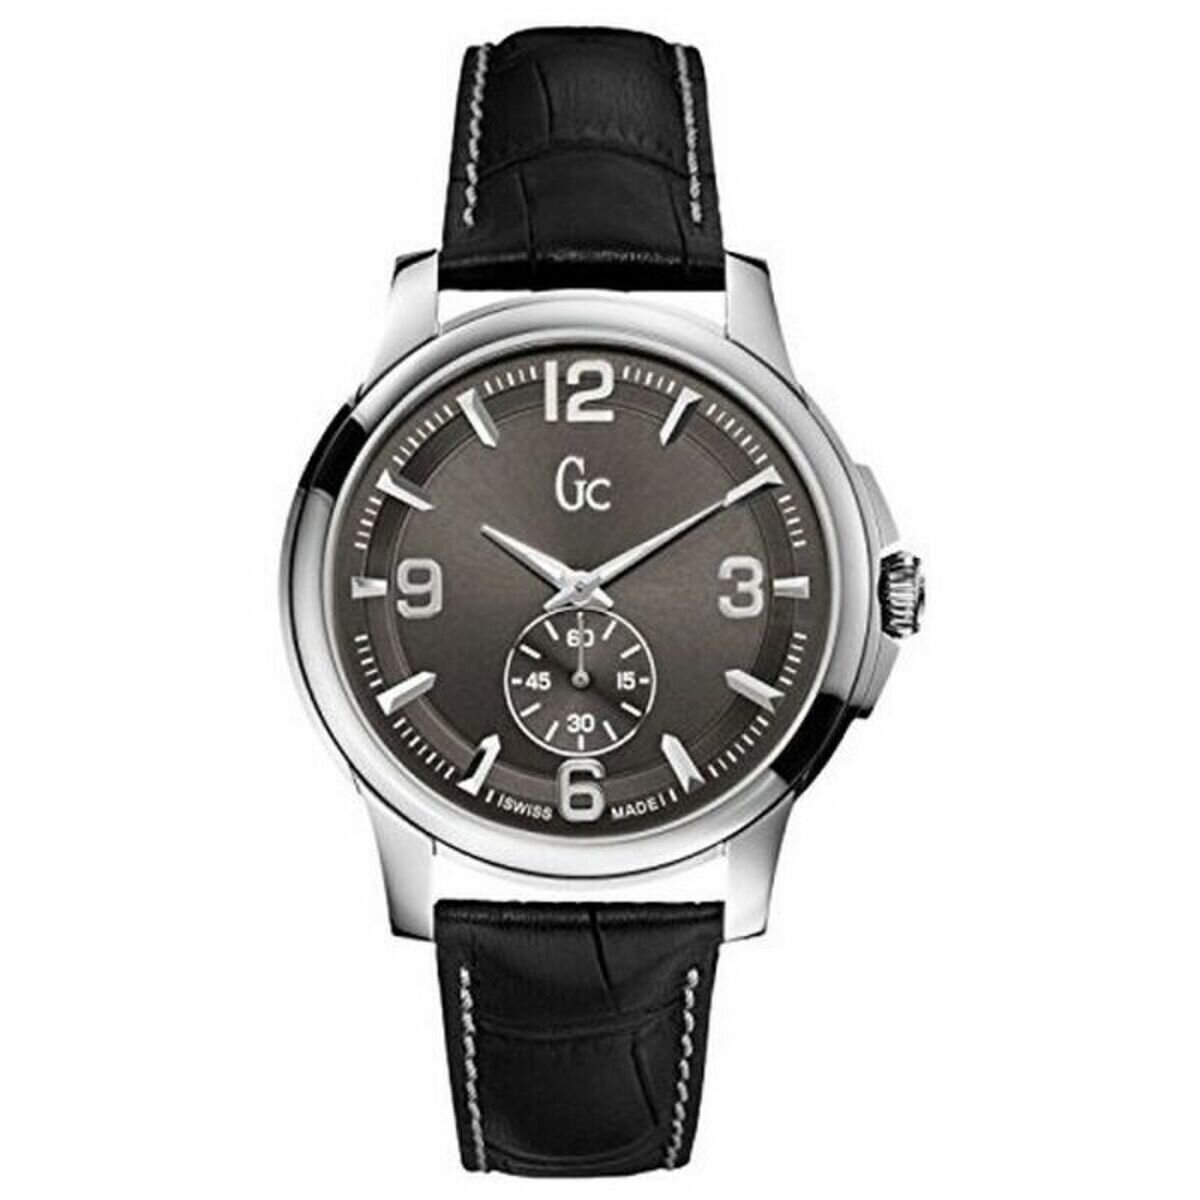 Men's Black And Silver Analog Guess Watch